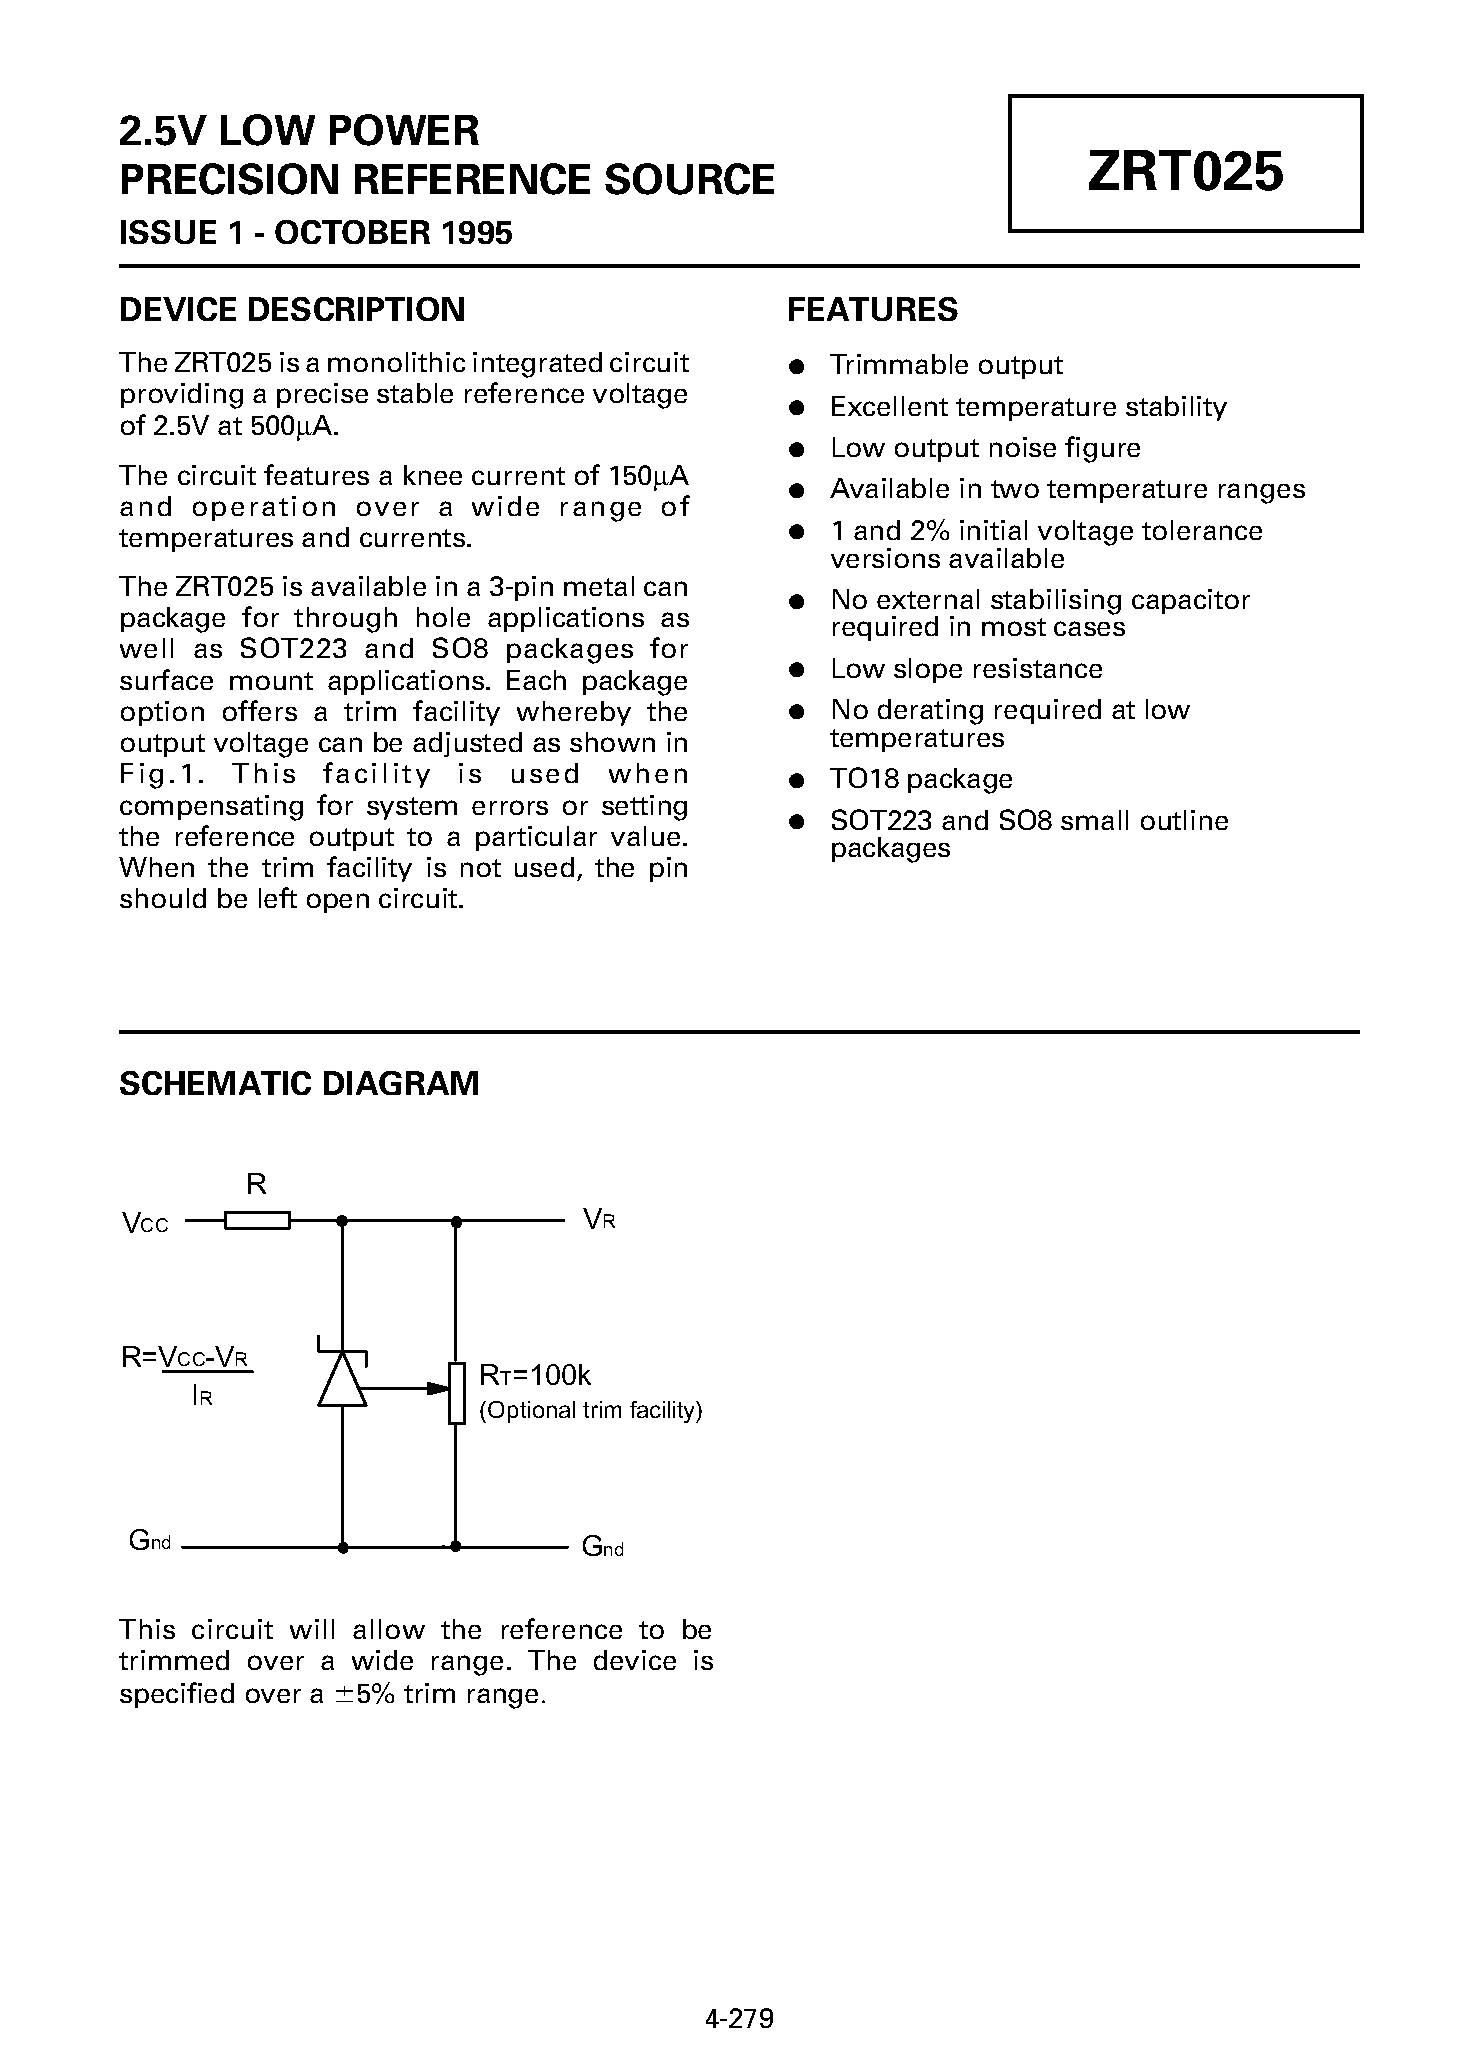 Datasheet ZRT025GC1 - 2.5V LOW POWER PRECISION REFERENCE SOURCE page 1